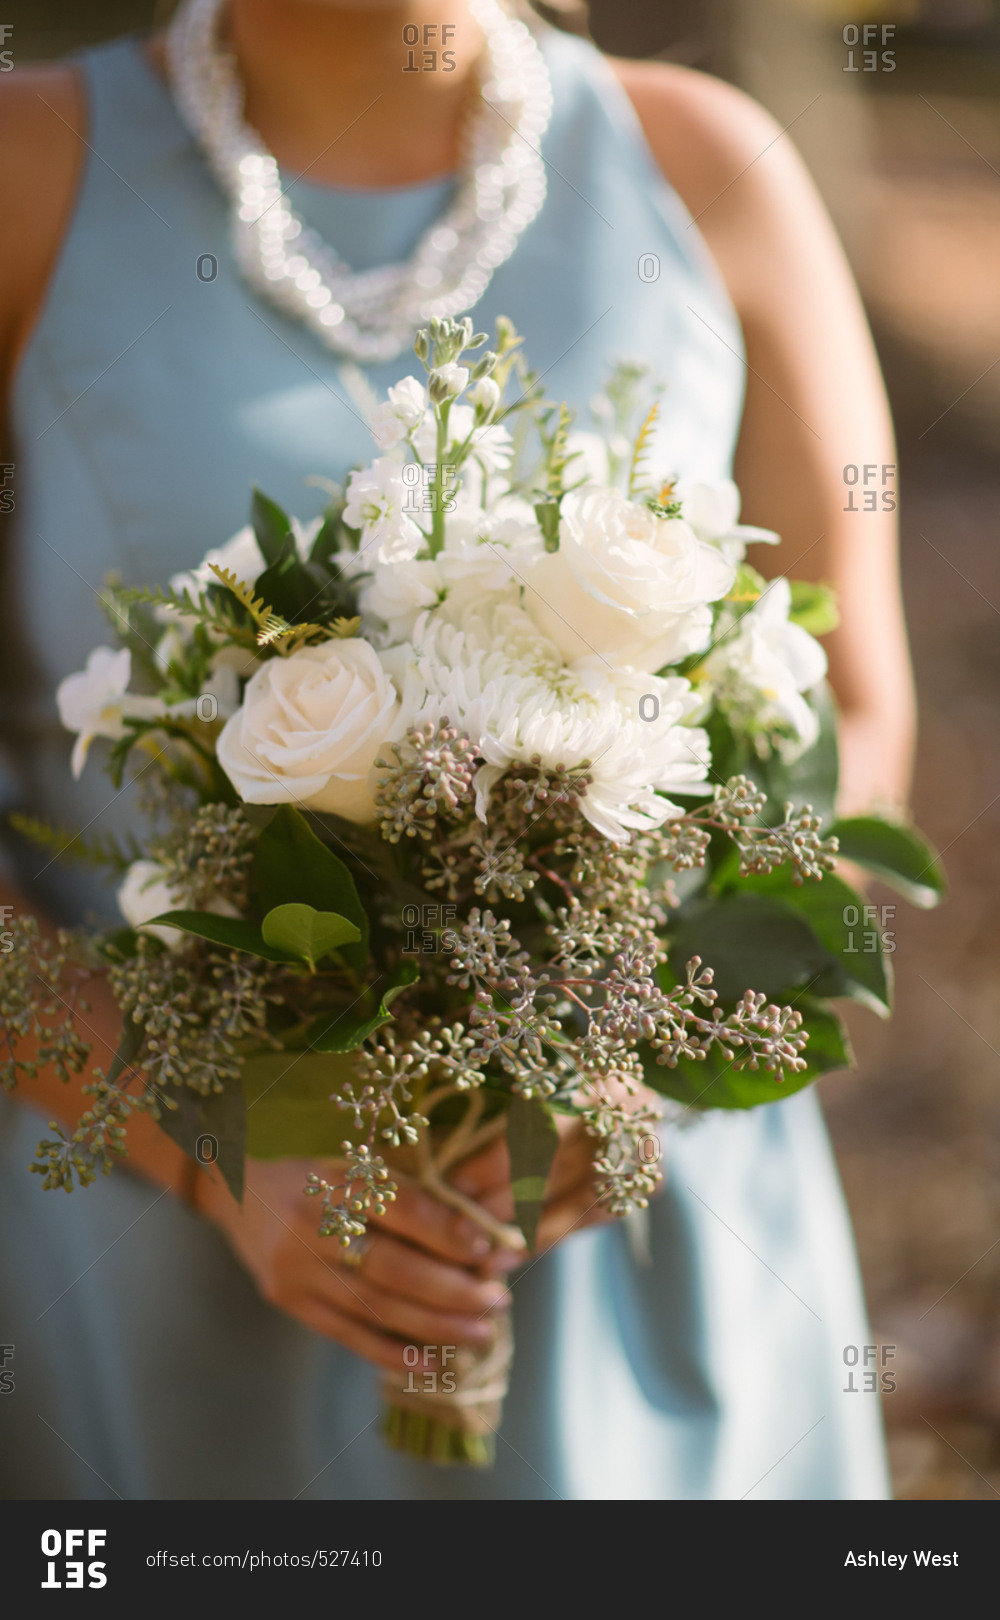 A bridesmaid with white flowers